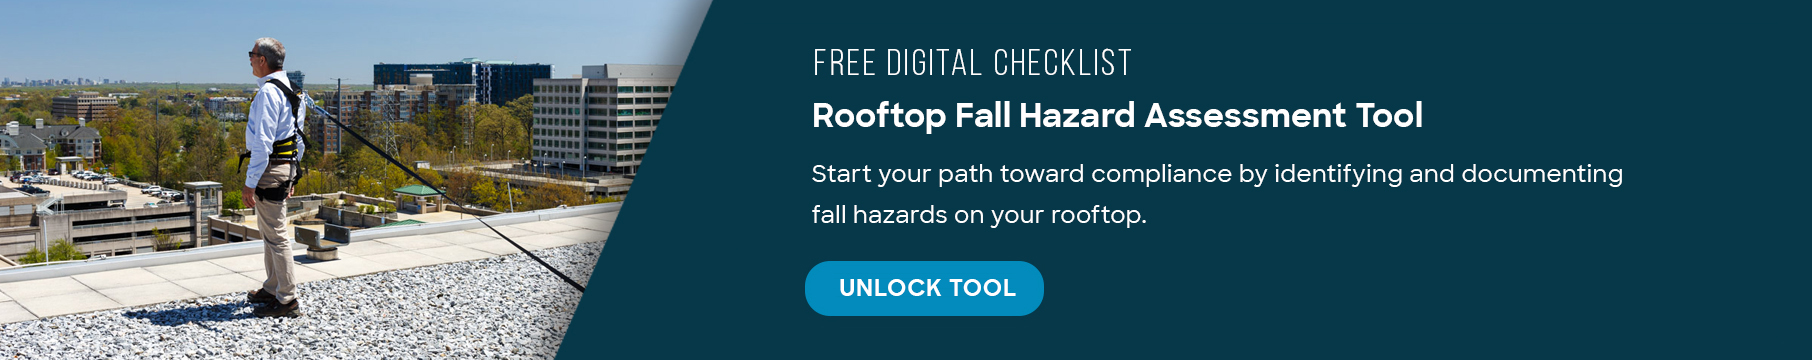 Rooftop Fall Hazard Assessment safety compliance documentation